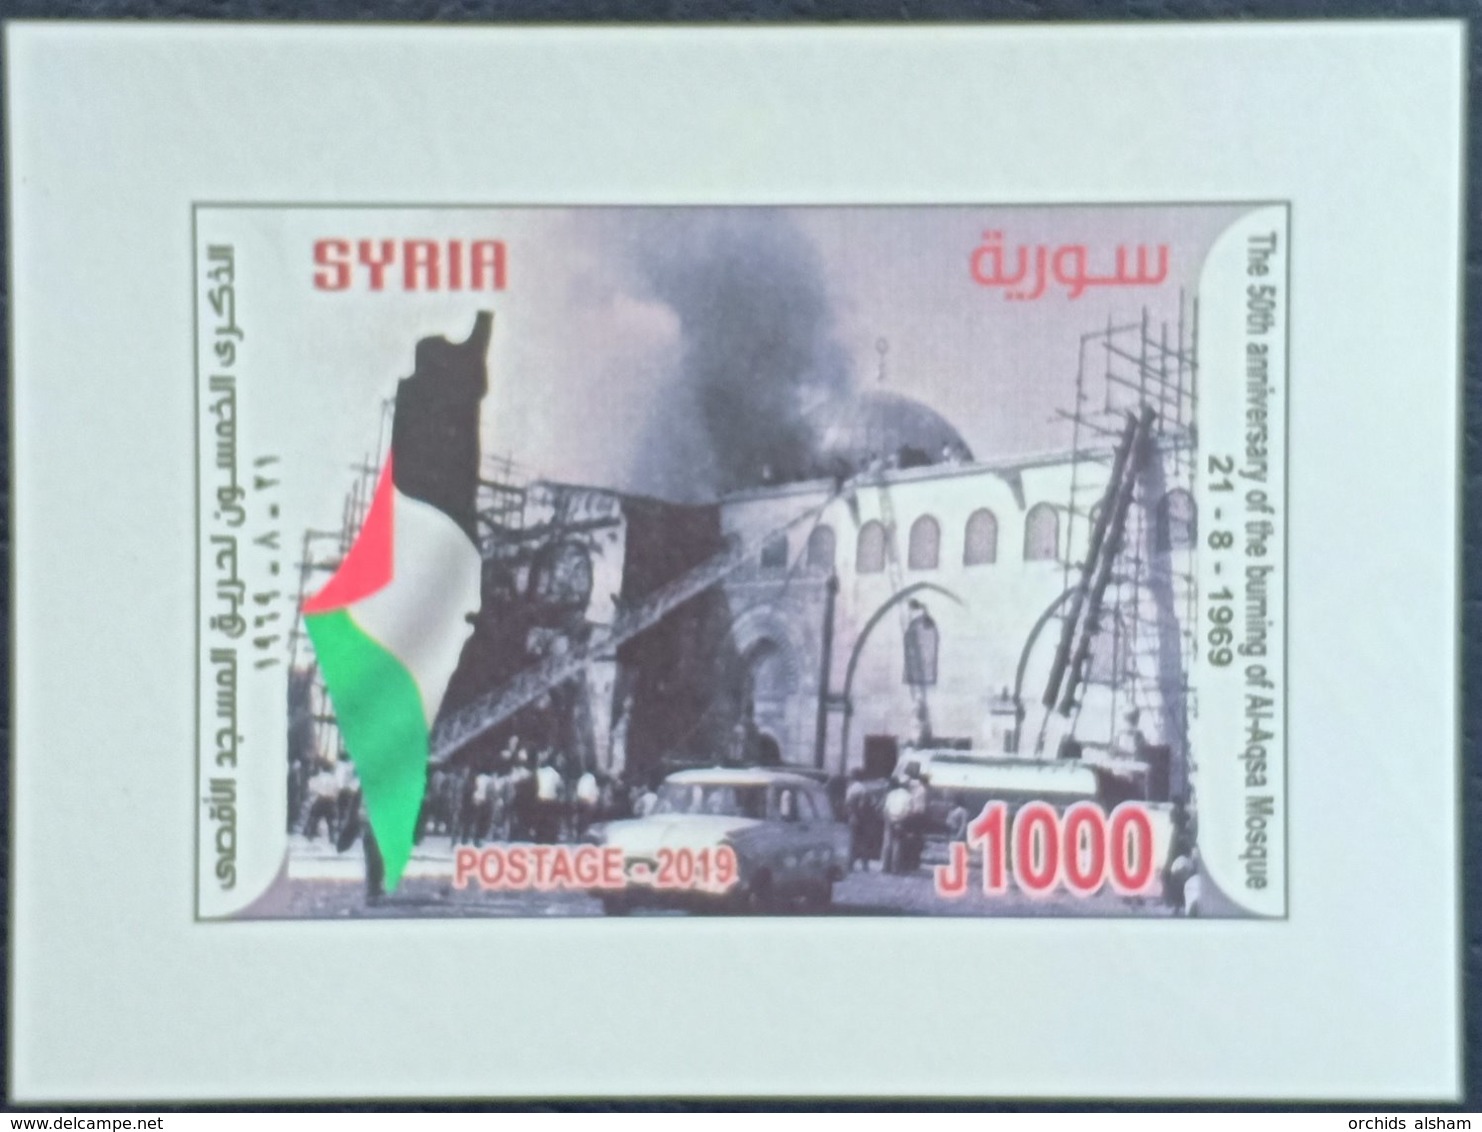 Syria 2019 NEW MNH Block - Al-Quds Jerusalem 50th Anniv Of The Burning Of Al-Aqsa Mosque In Palestine - Only 1000 Issued - Syrië